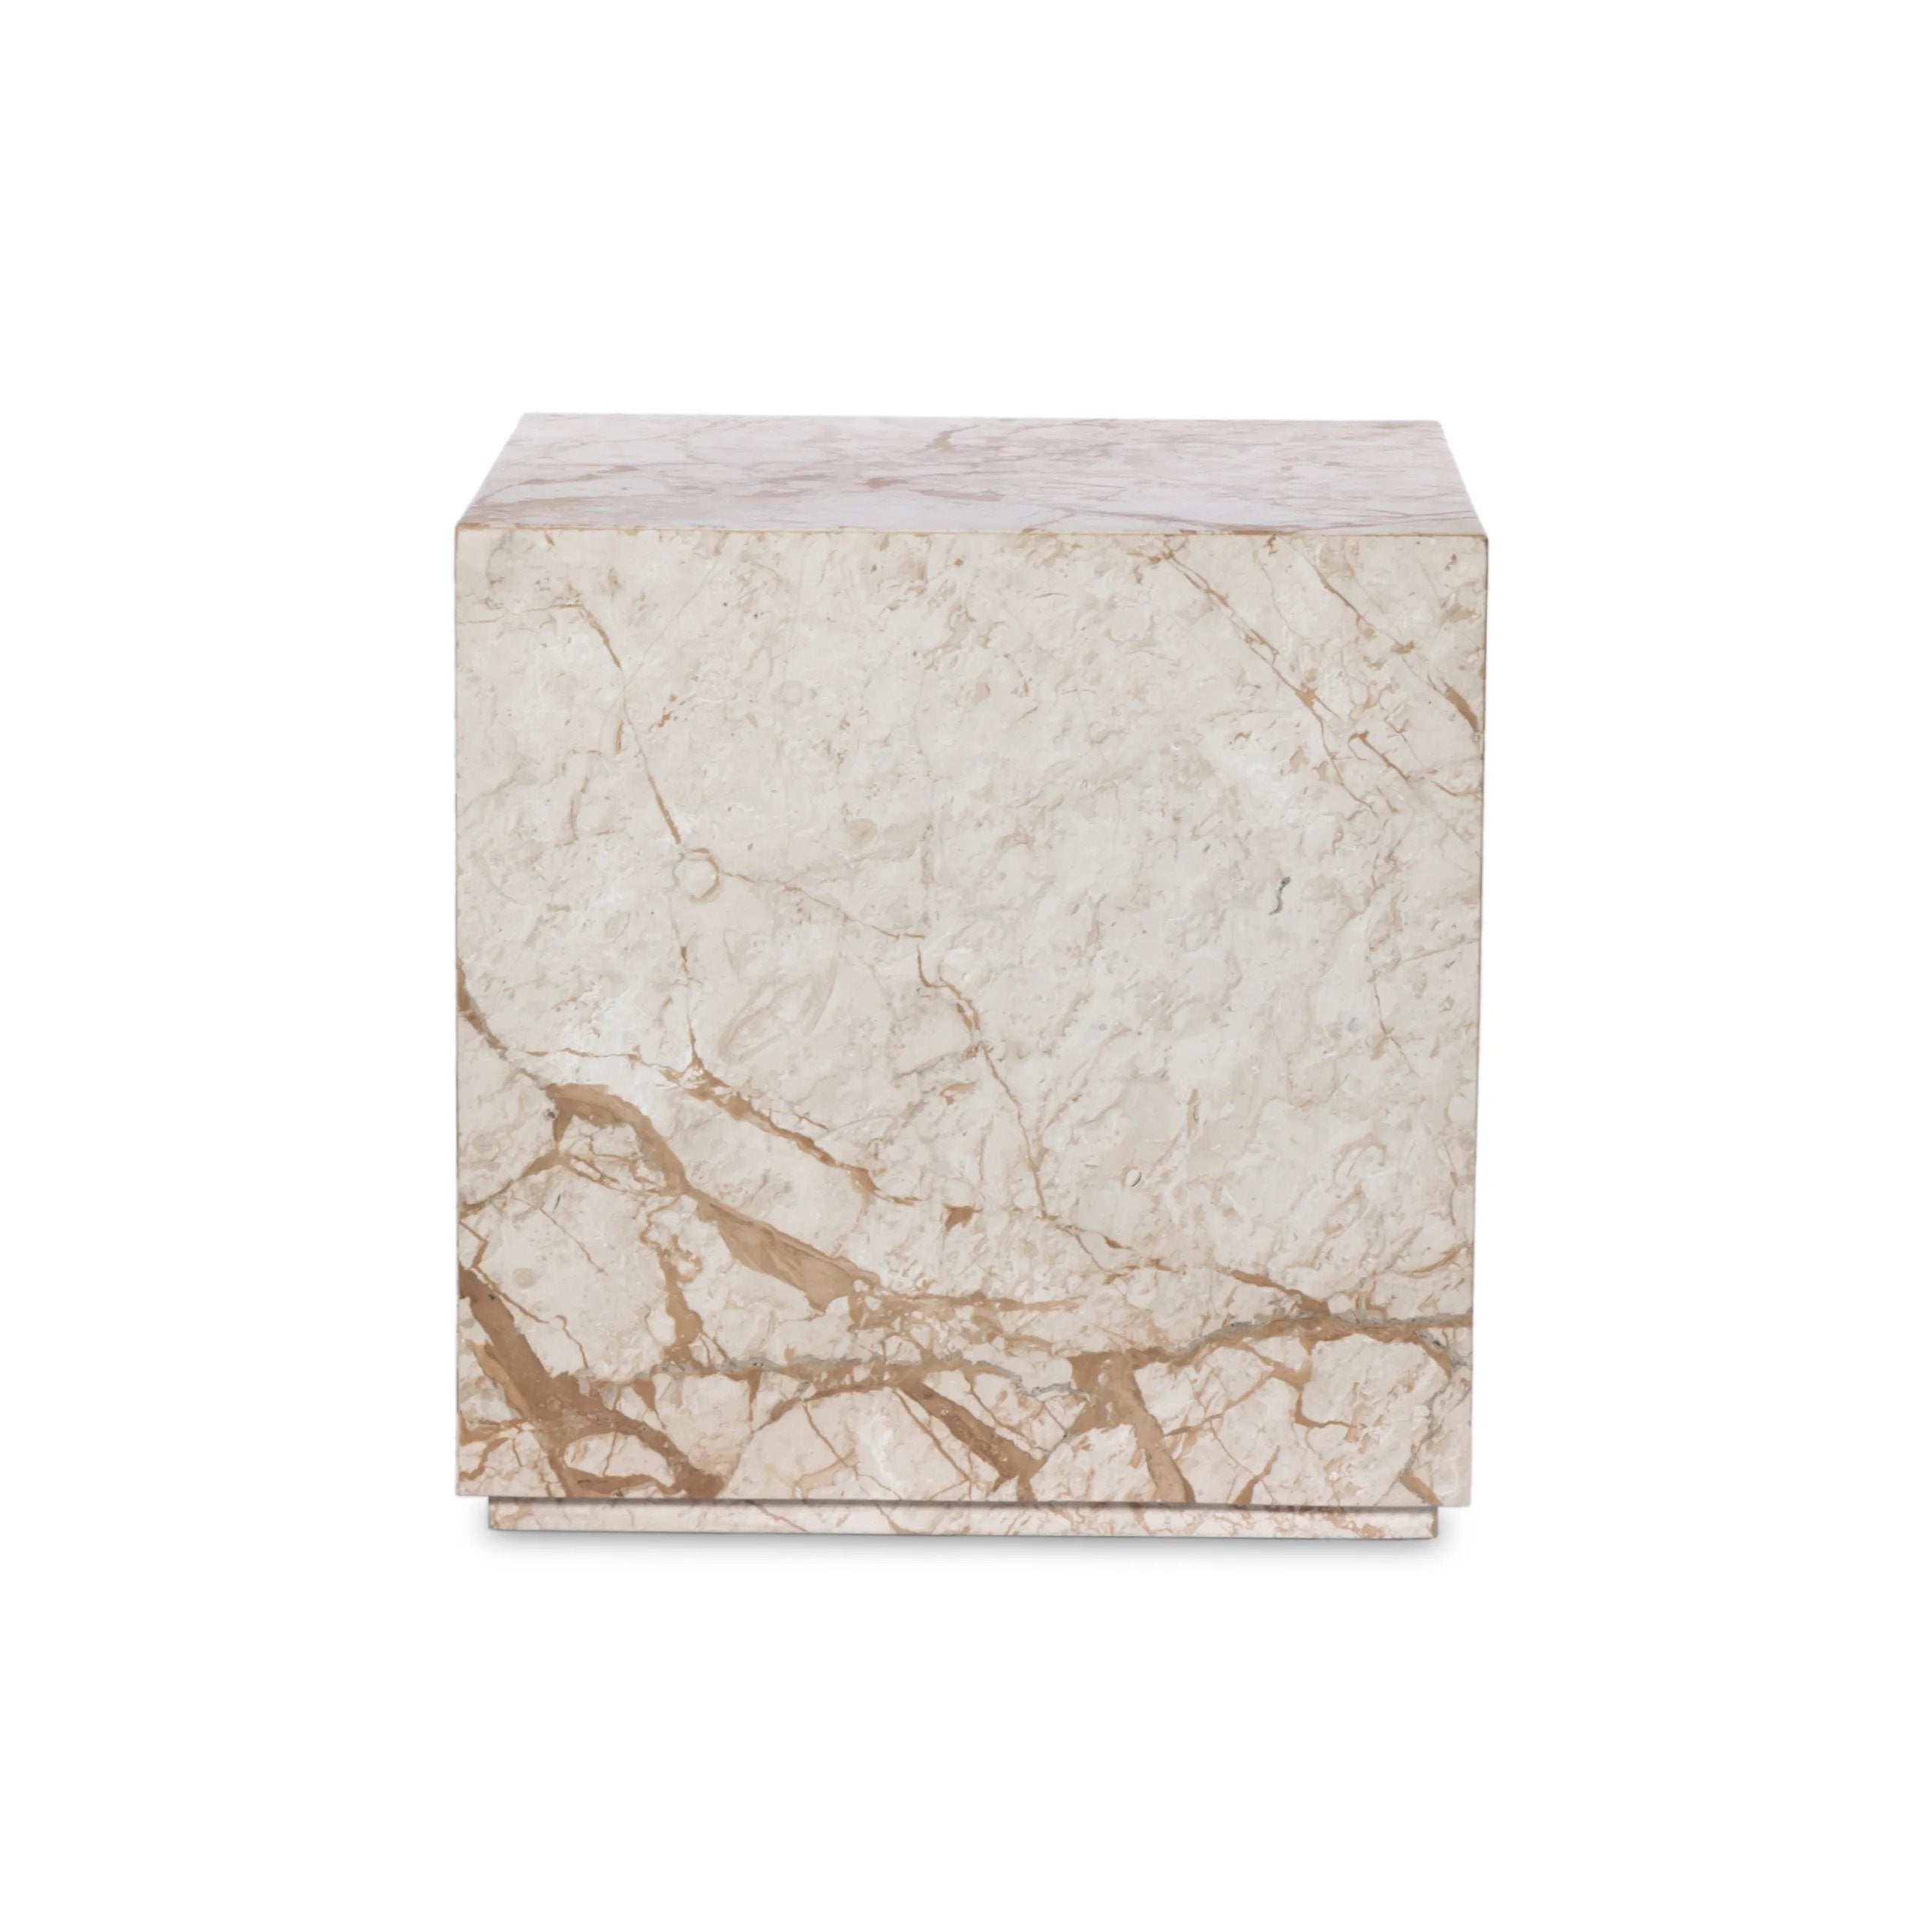 Taupe marble shapes a cubed, plinth-style end table that can be styled just about anywhere.Collection: Elemen Amethyst Home provides interior design, new home construction design consulting, vintage area rugs, and lighting in the Miami metro area.